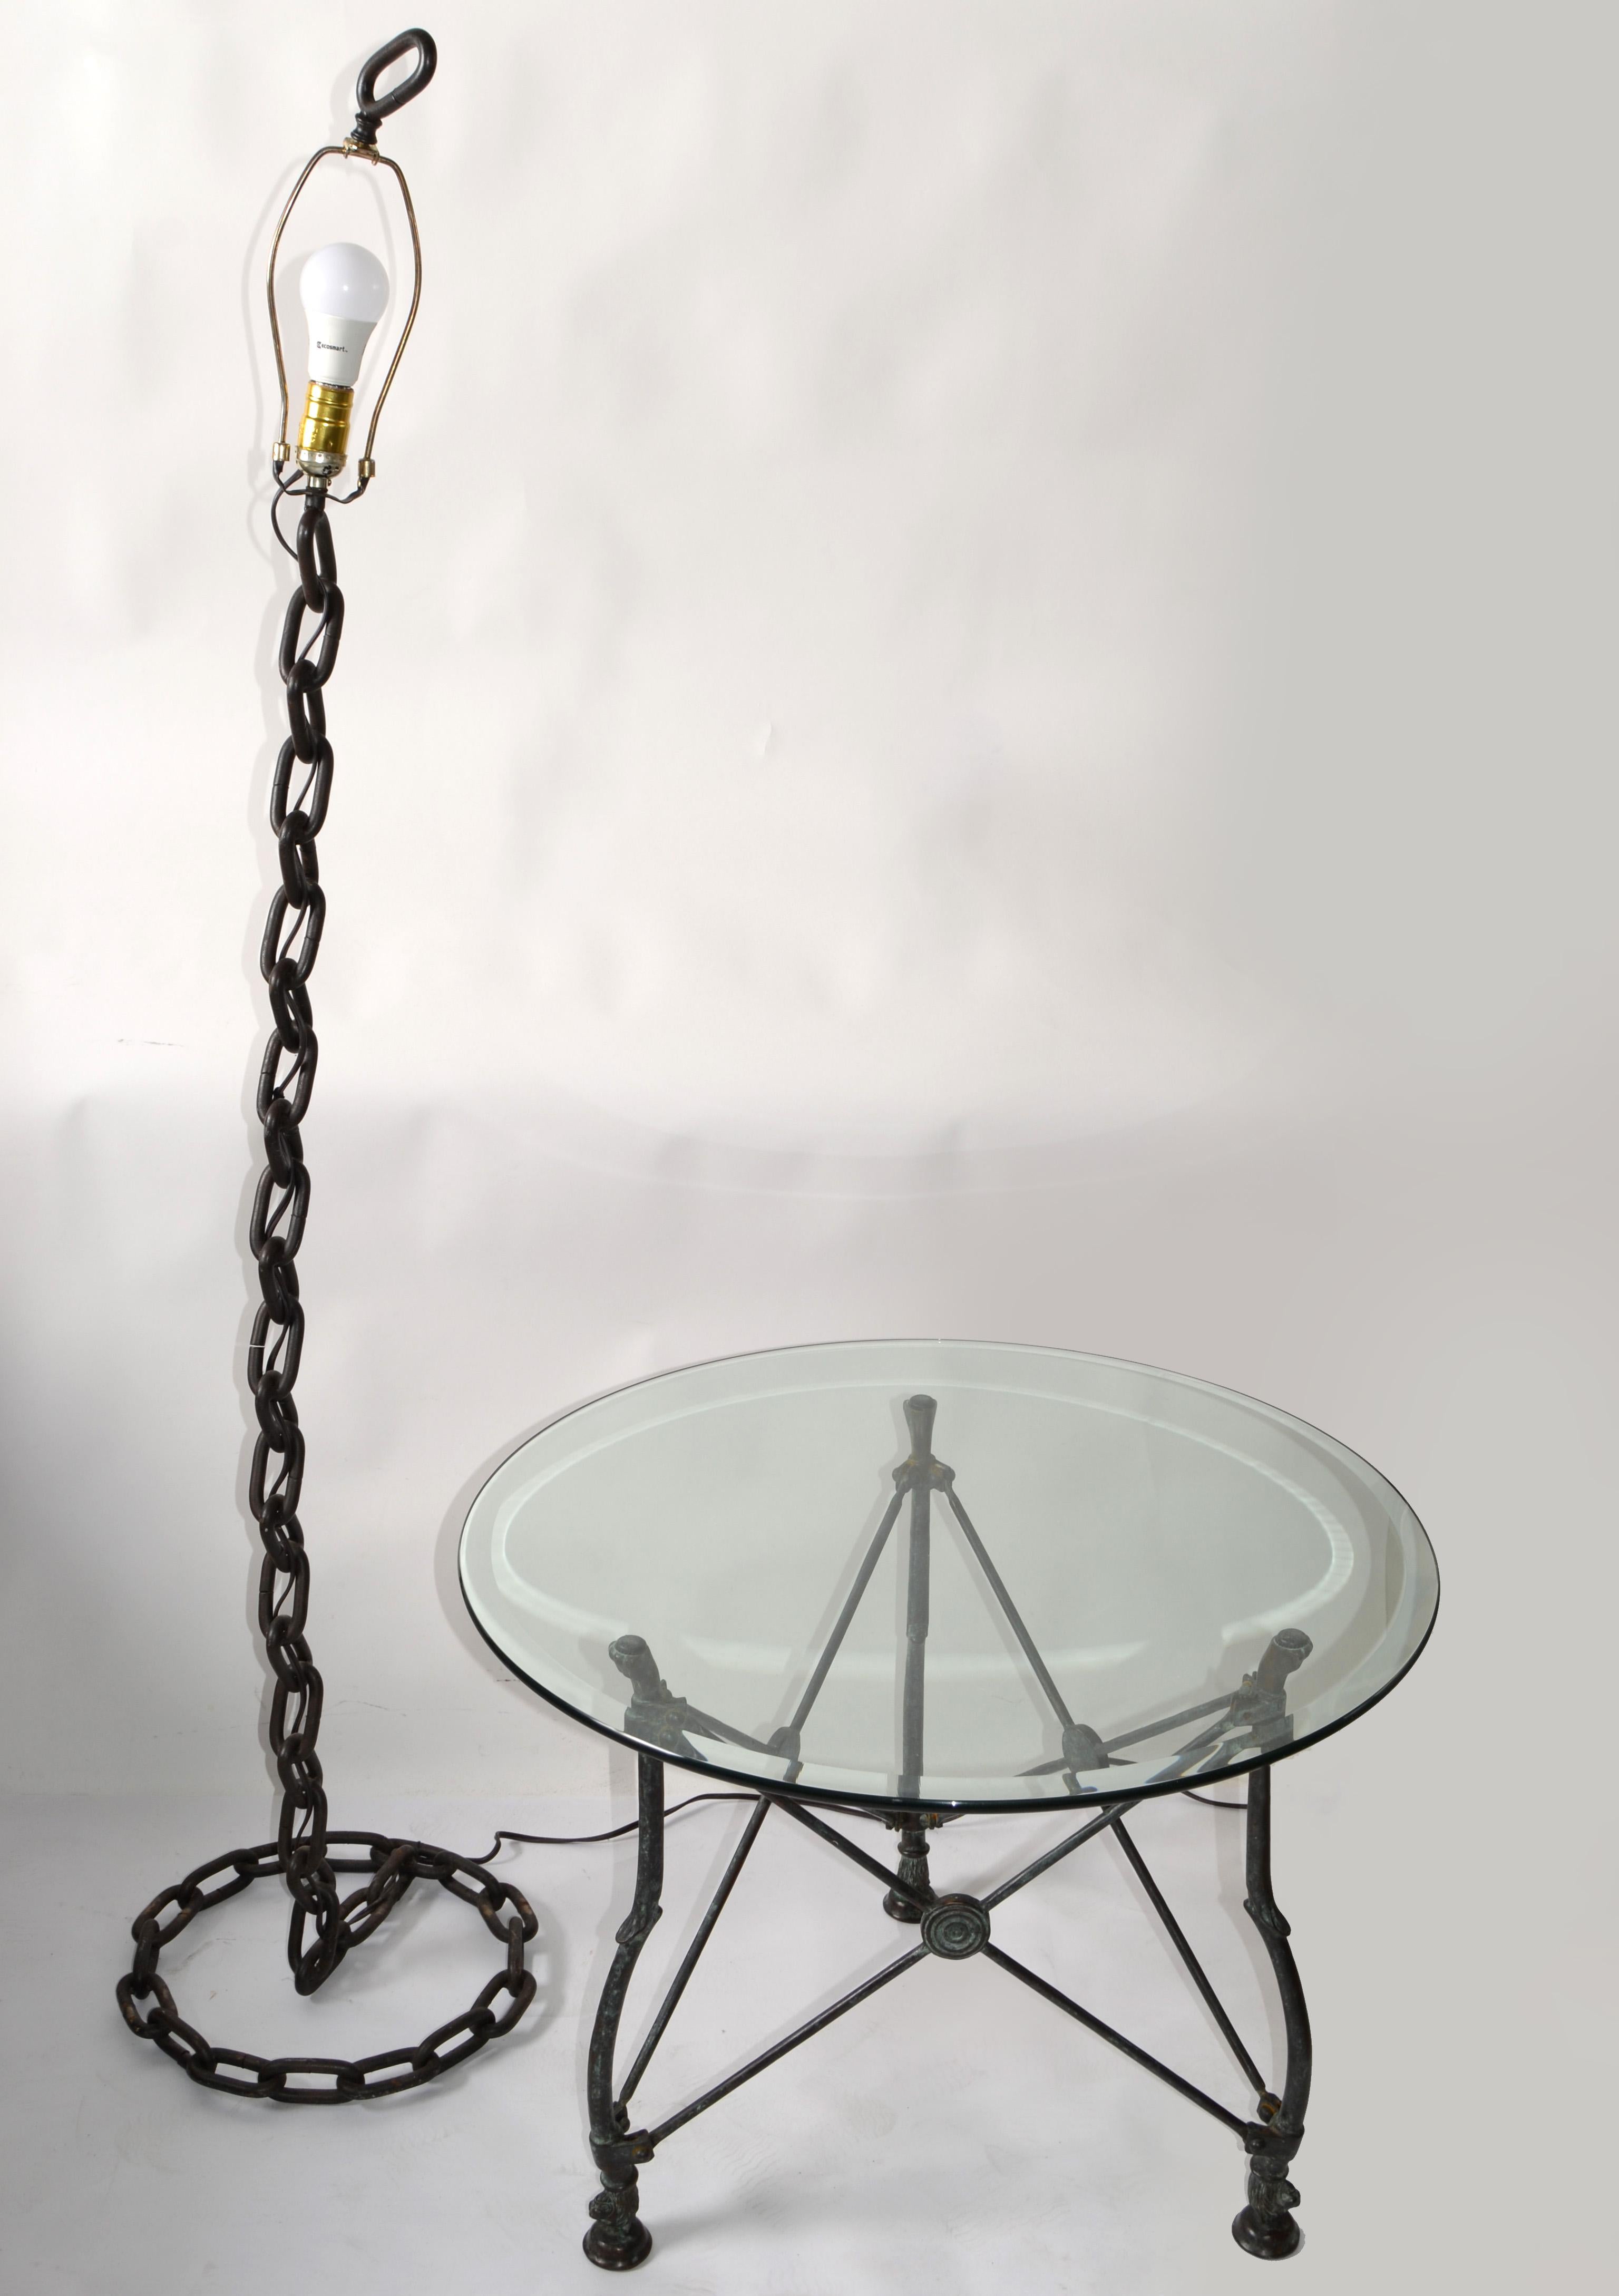 1970s French Brutalist Rustic Vintage Iron Chain Link Floor Lamp Round Base West 2